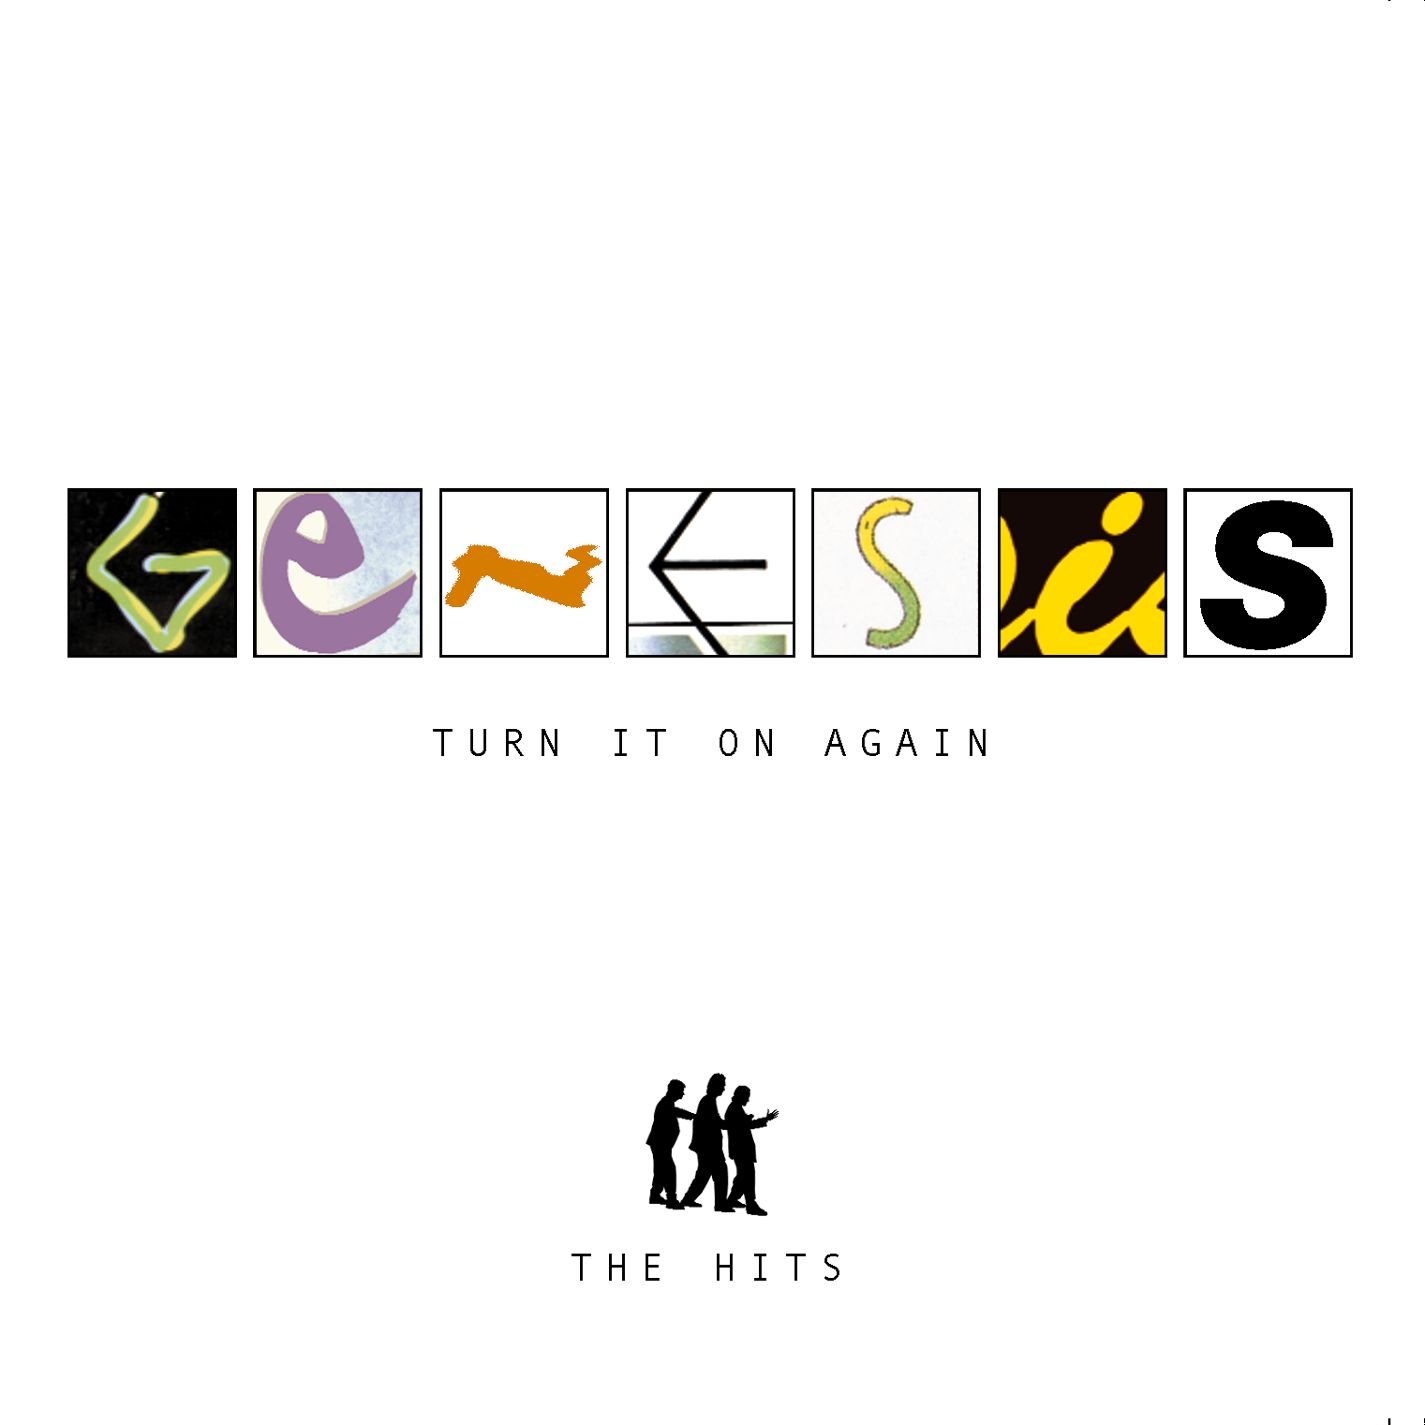  Turn It On Again - The Hits by GENESIS album cover